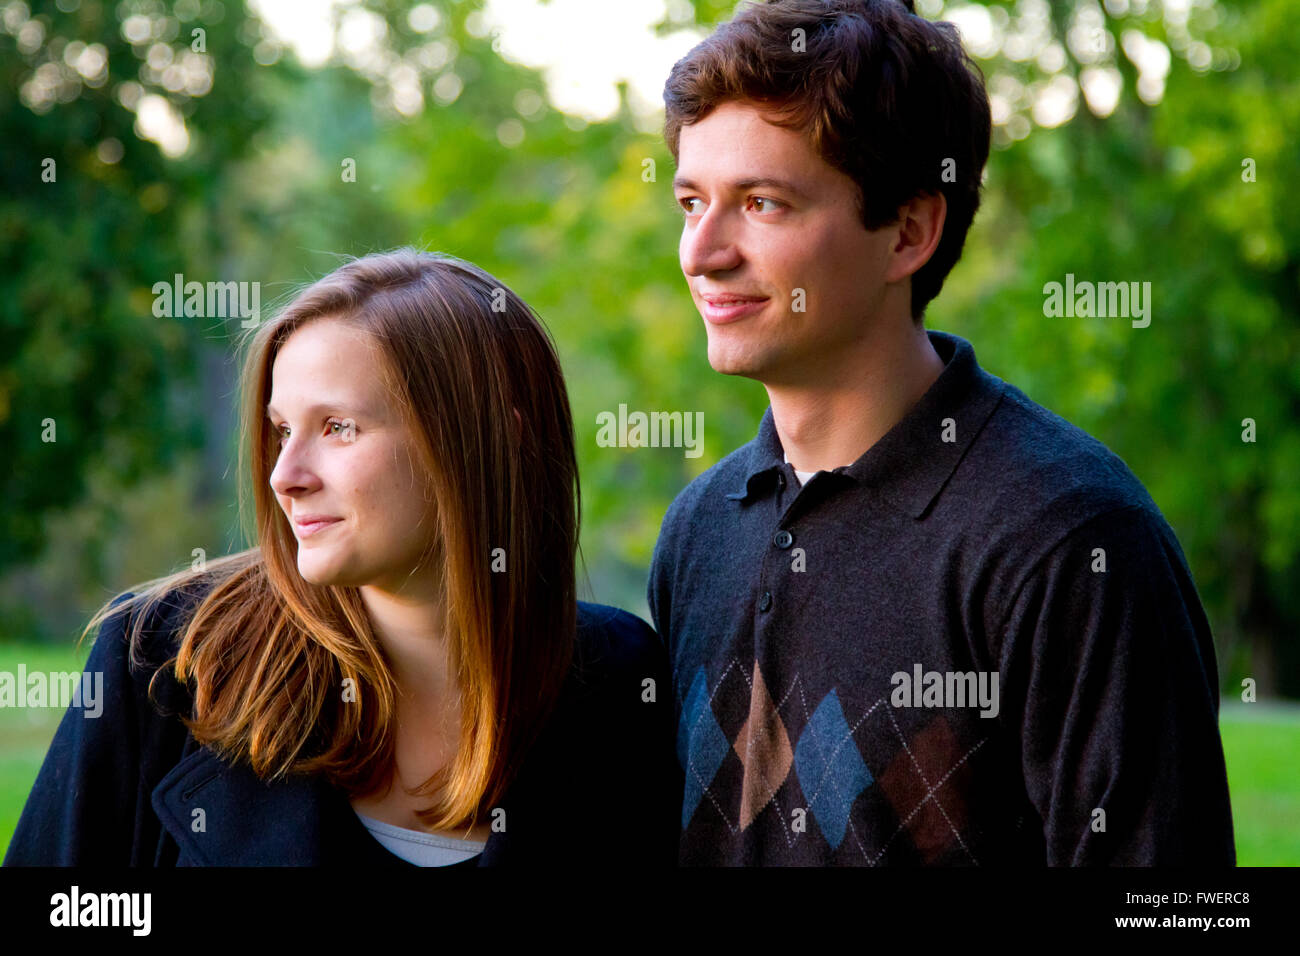 A couple stands together for this portrait looking to the side. Stock Photo